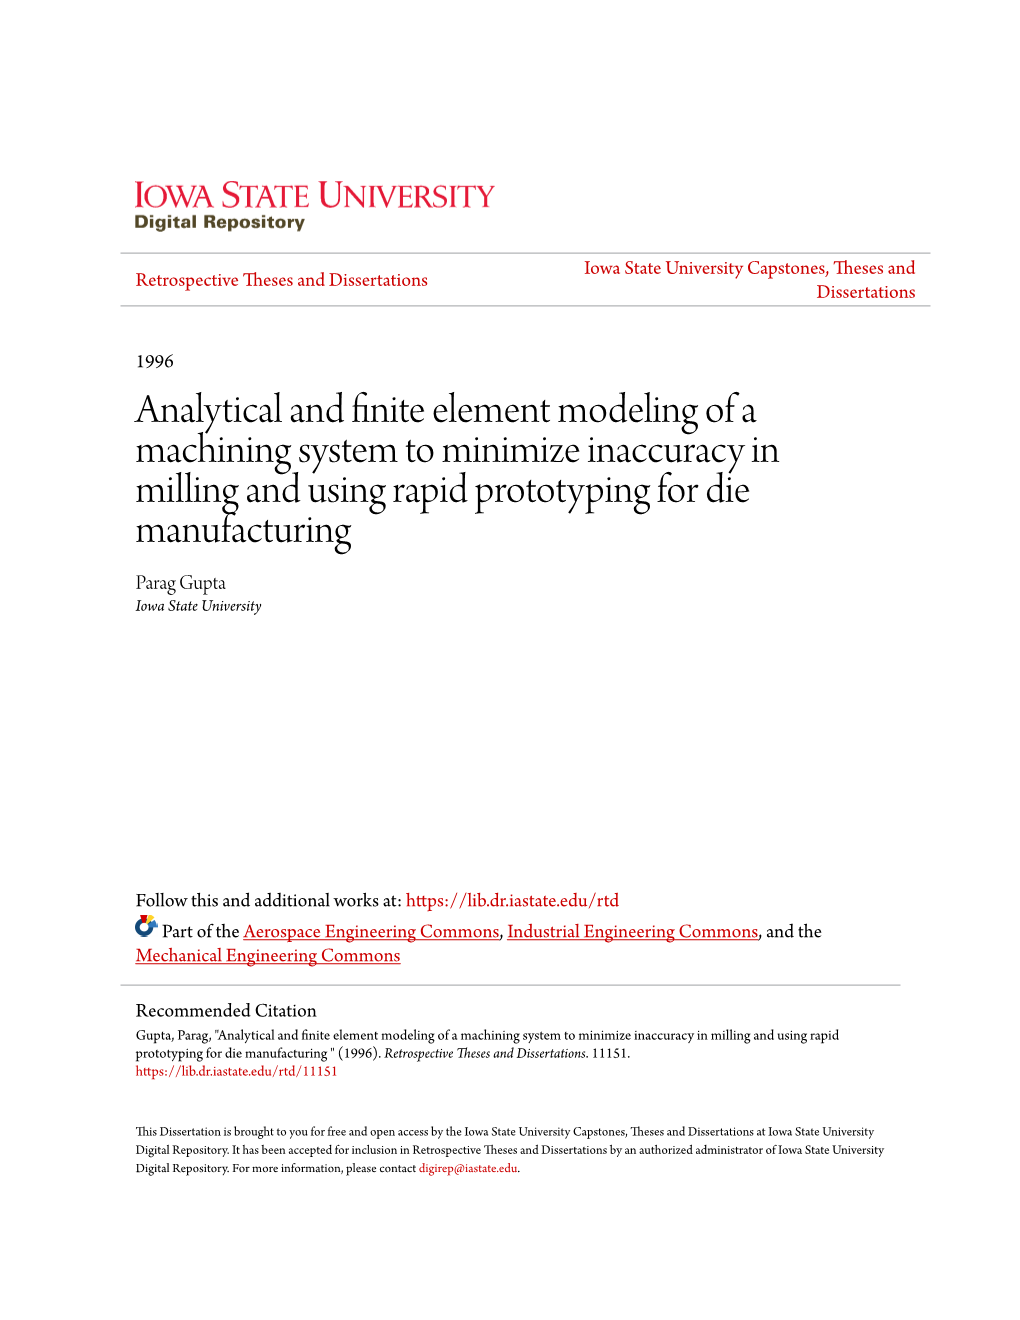 Analytical and Finite Element Modeling of a Machining System to Minimize